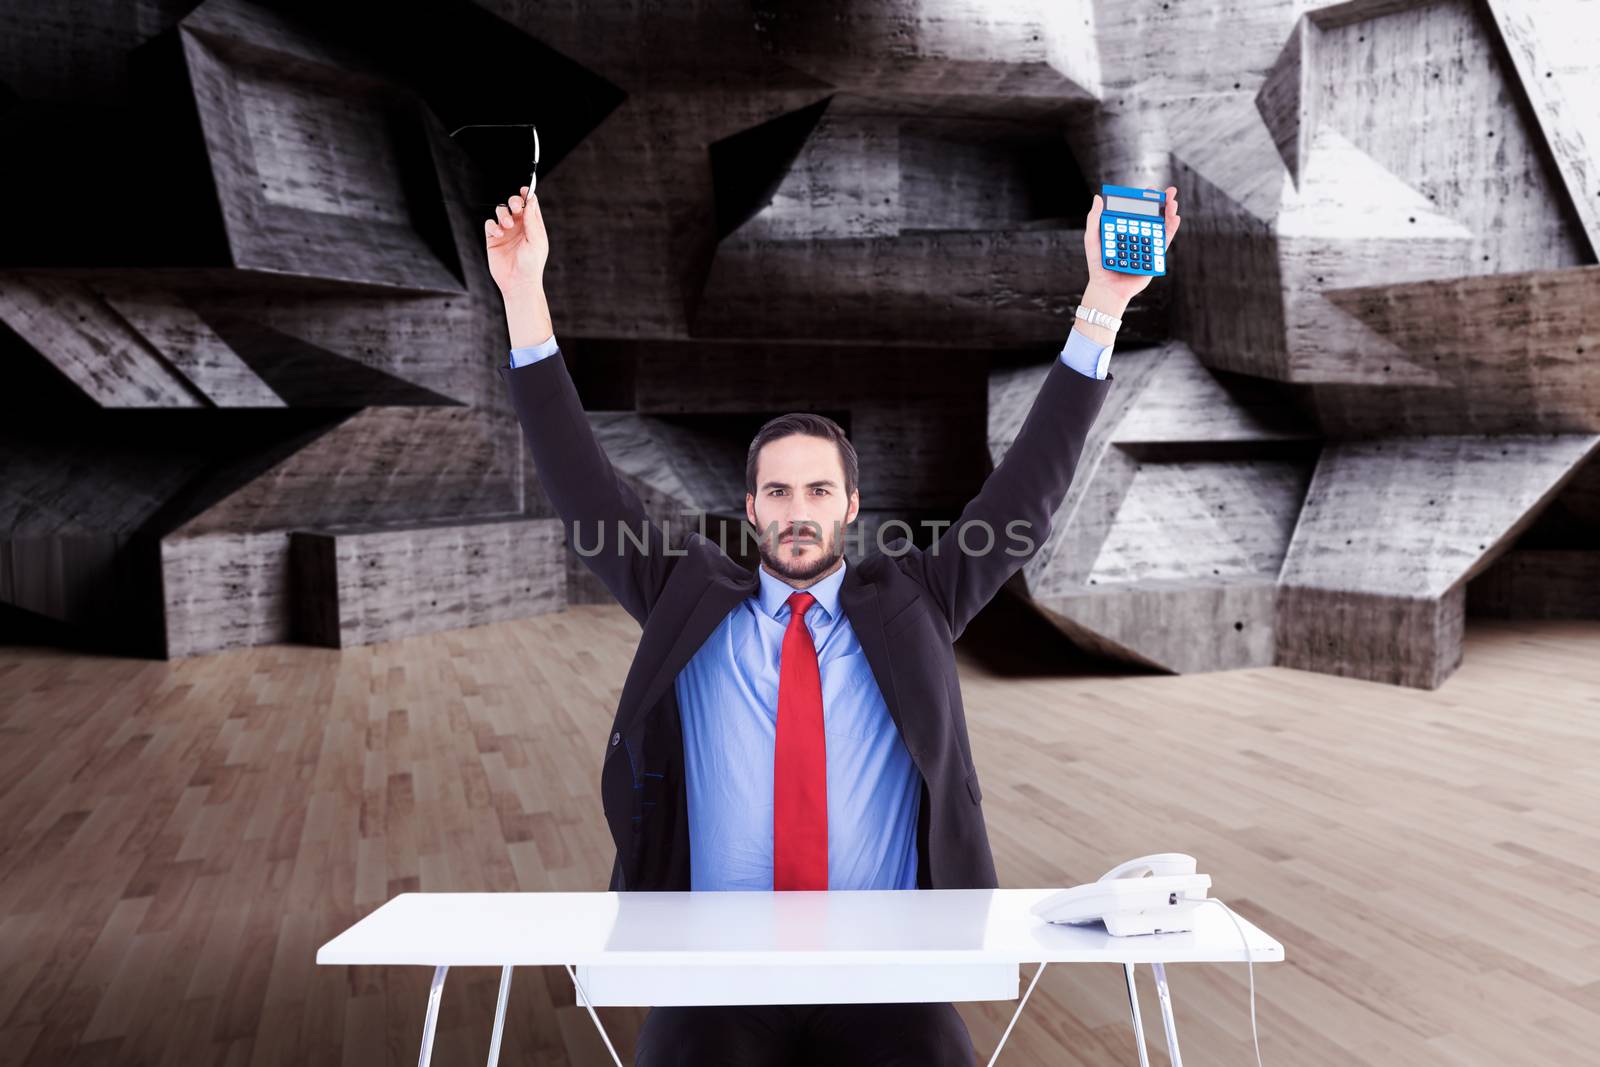 Composite image of businessman holding up reading glasses and calculator by Wavebreakmedia